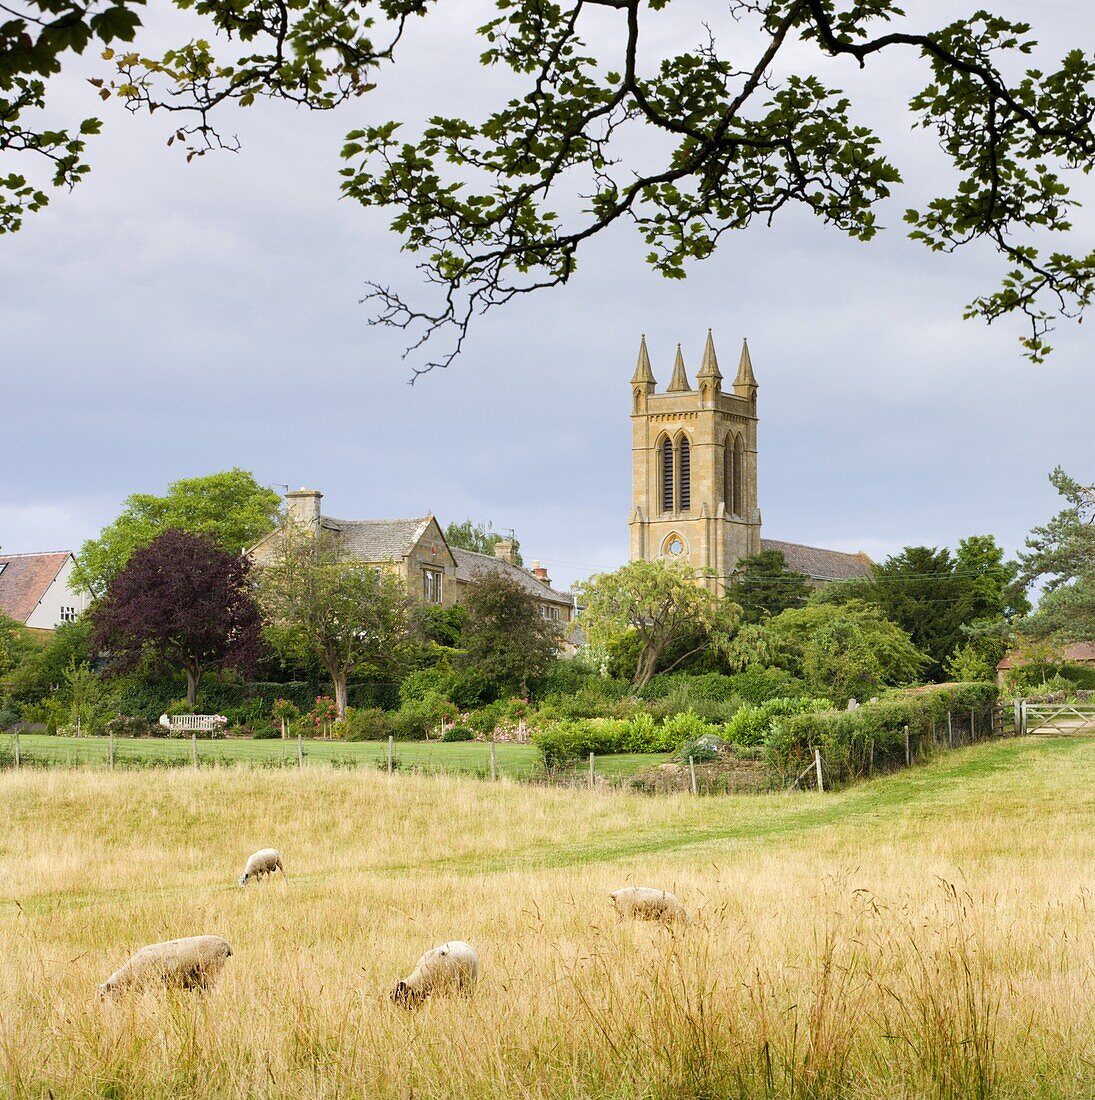 Rural field with views to St. Michaels Church in the Cotswolds village of Broadway, Worcestershire, England, United Kingdom, Europe